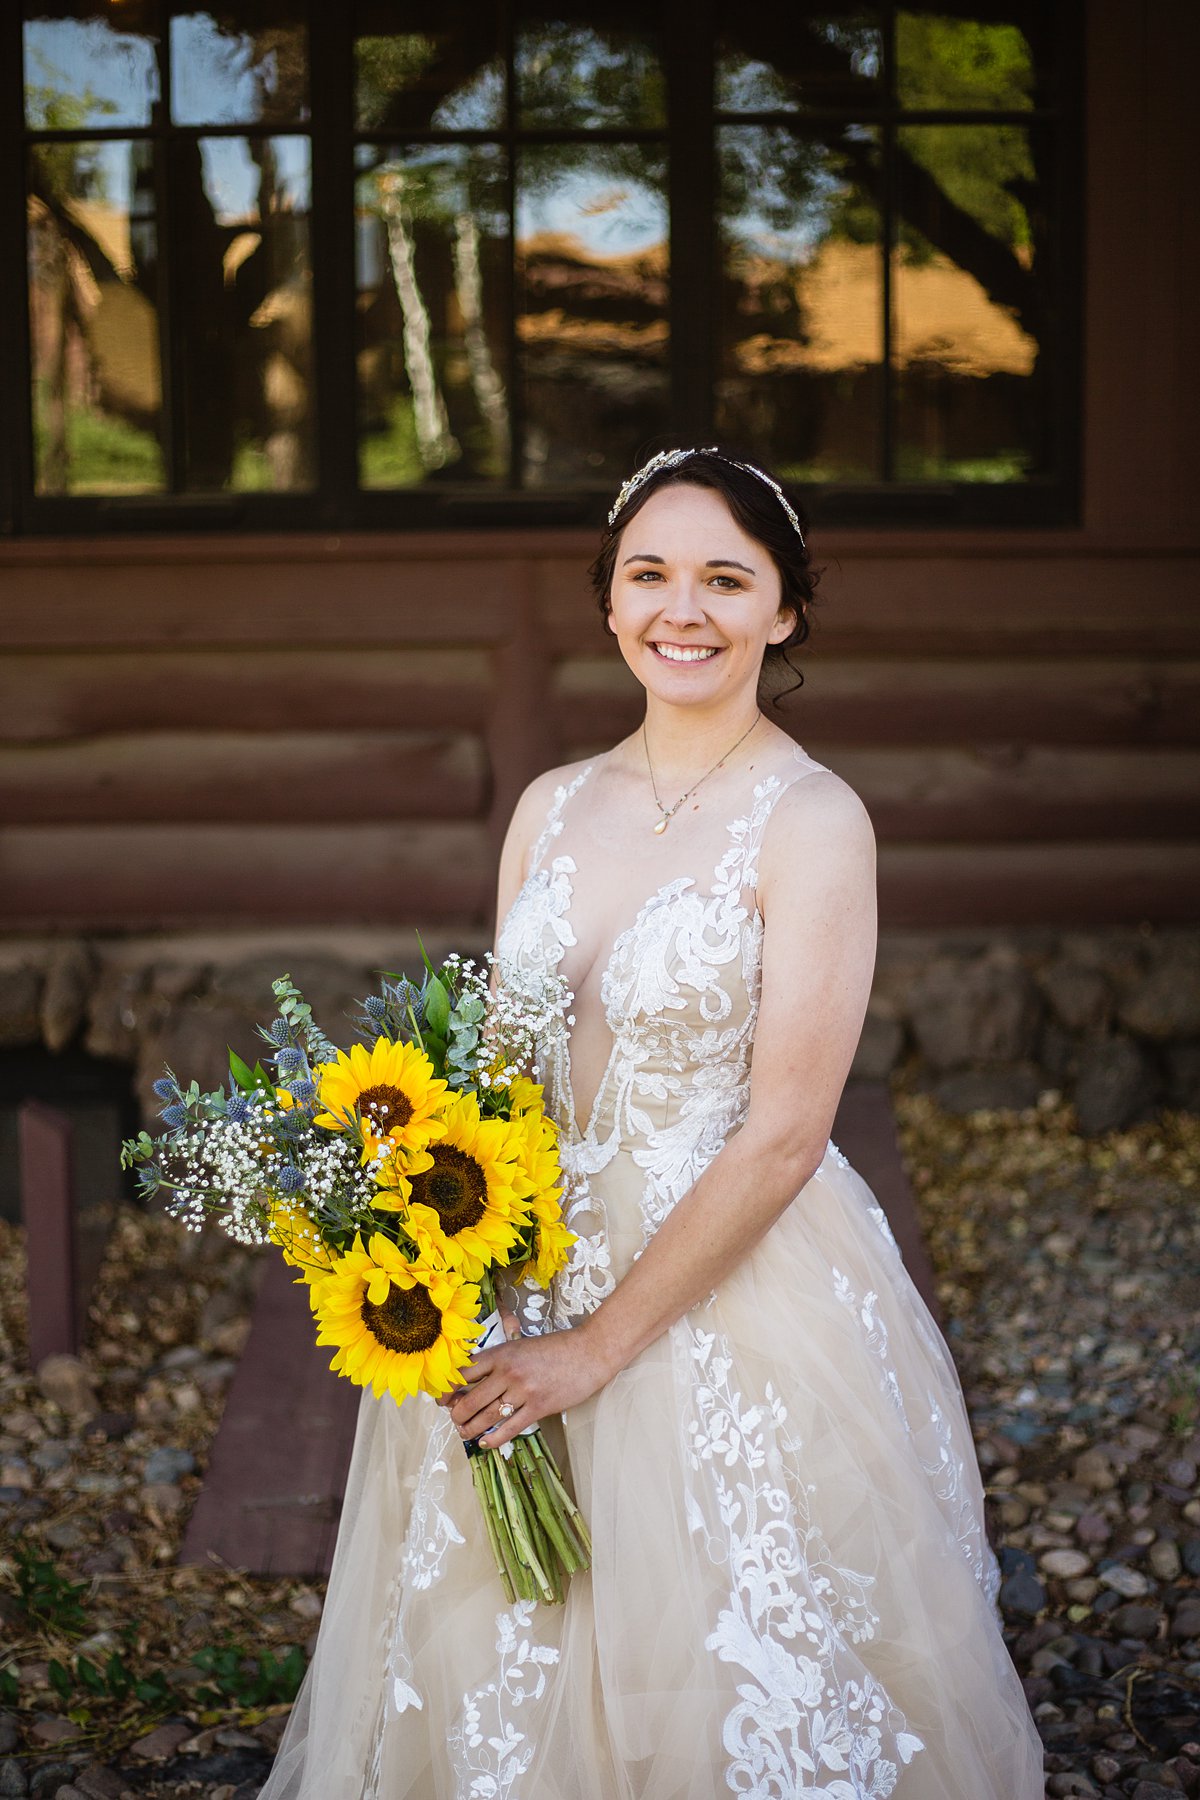 Bride in nude and lace wedding dress holding sunflower bouquet by PMA Photography.